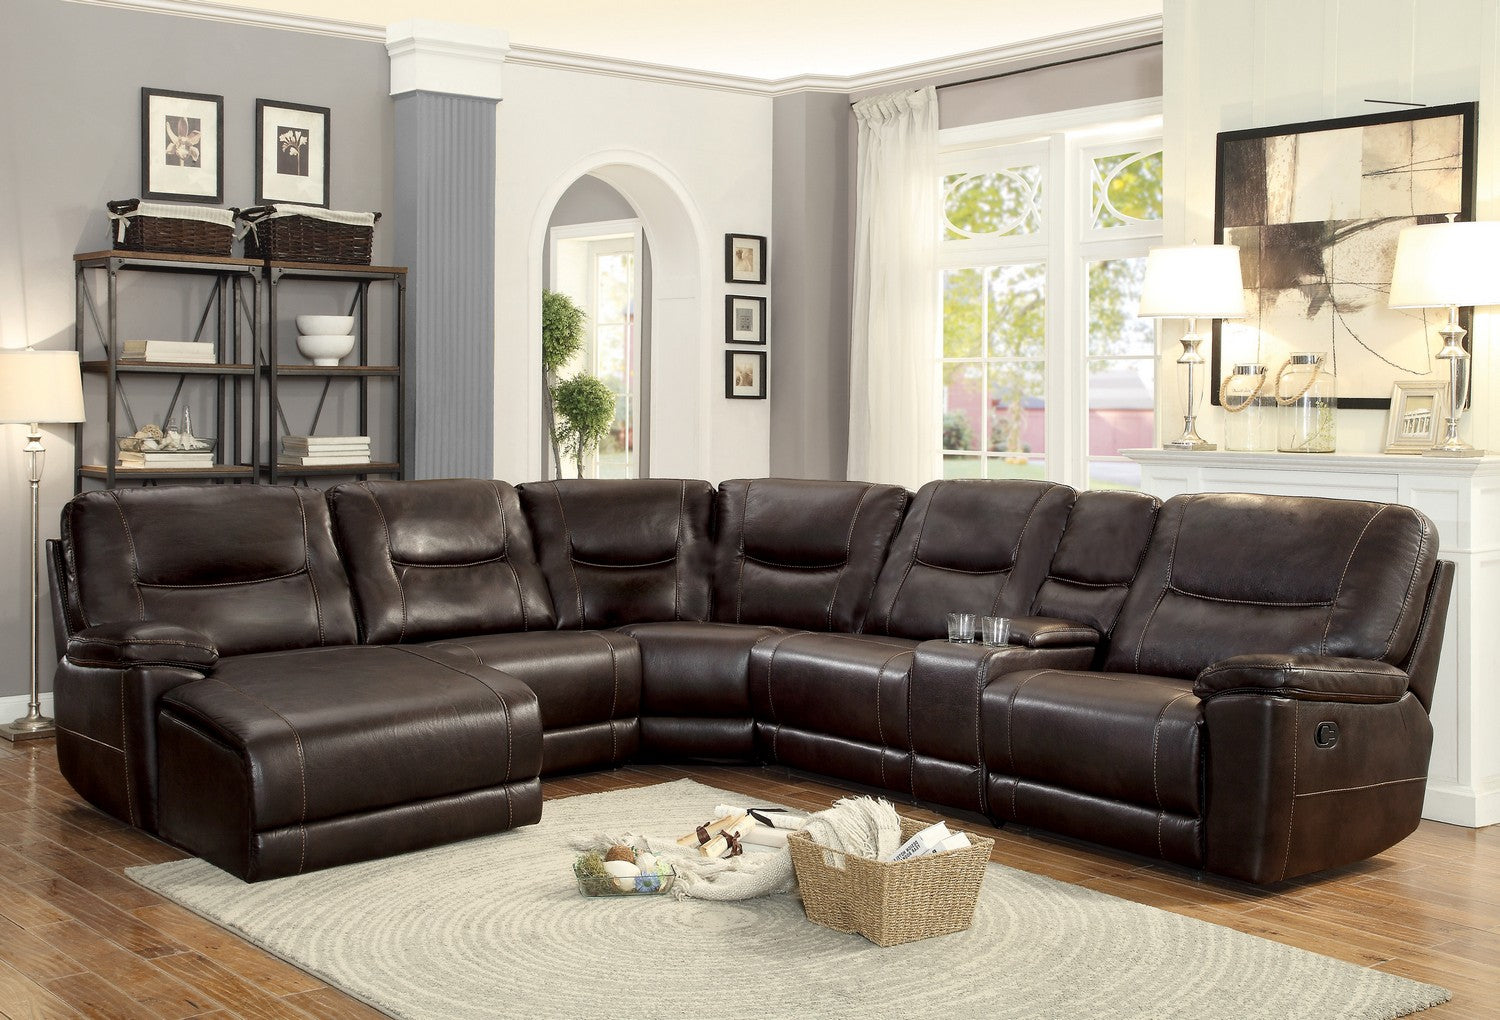 honey brown leather sectional sofa